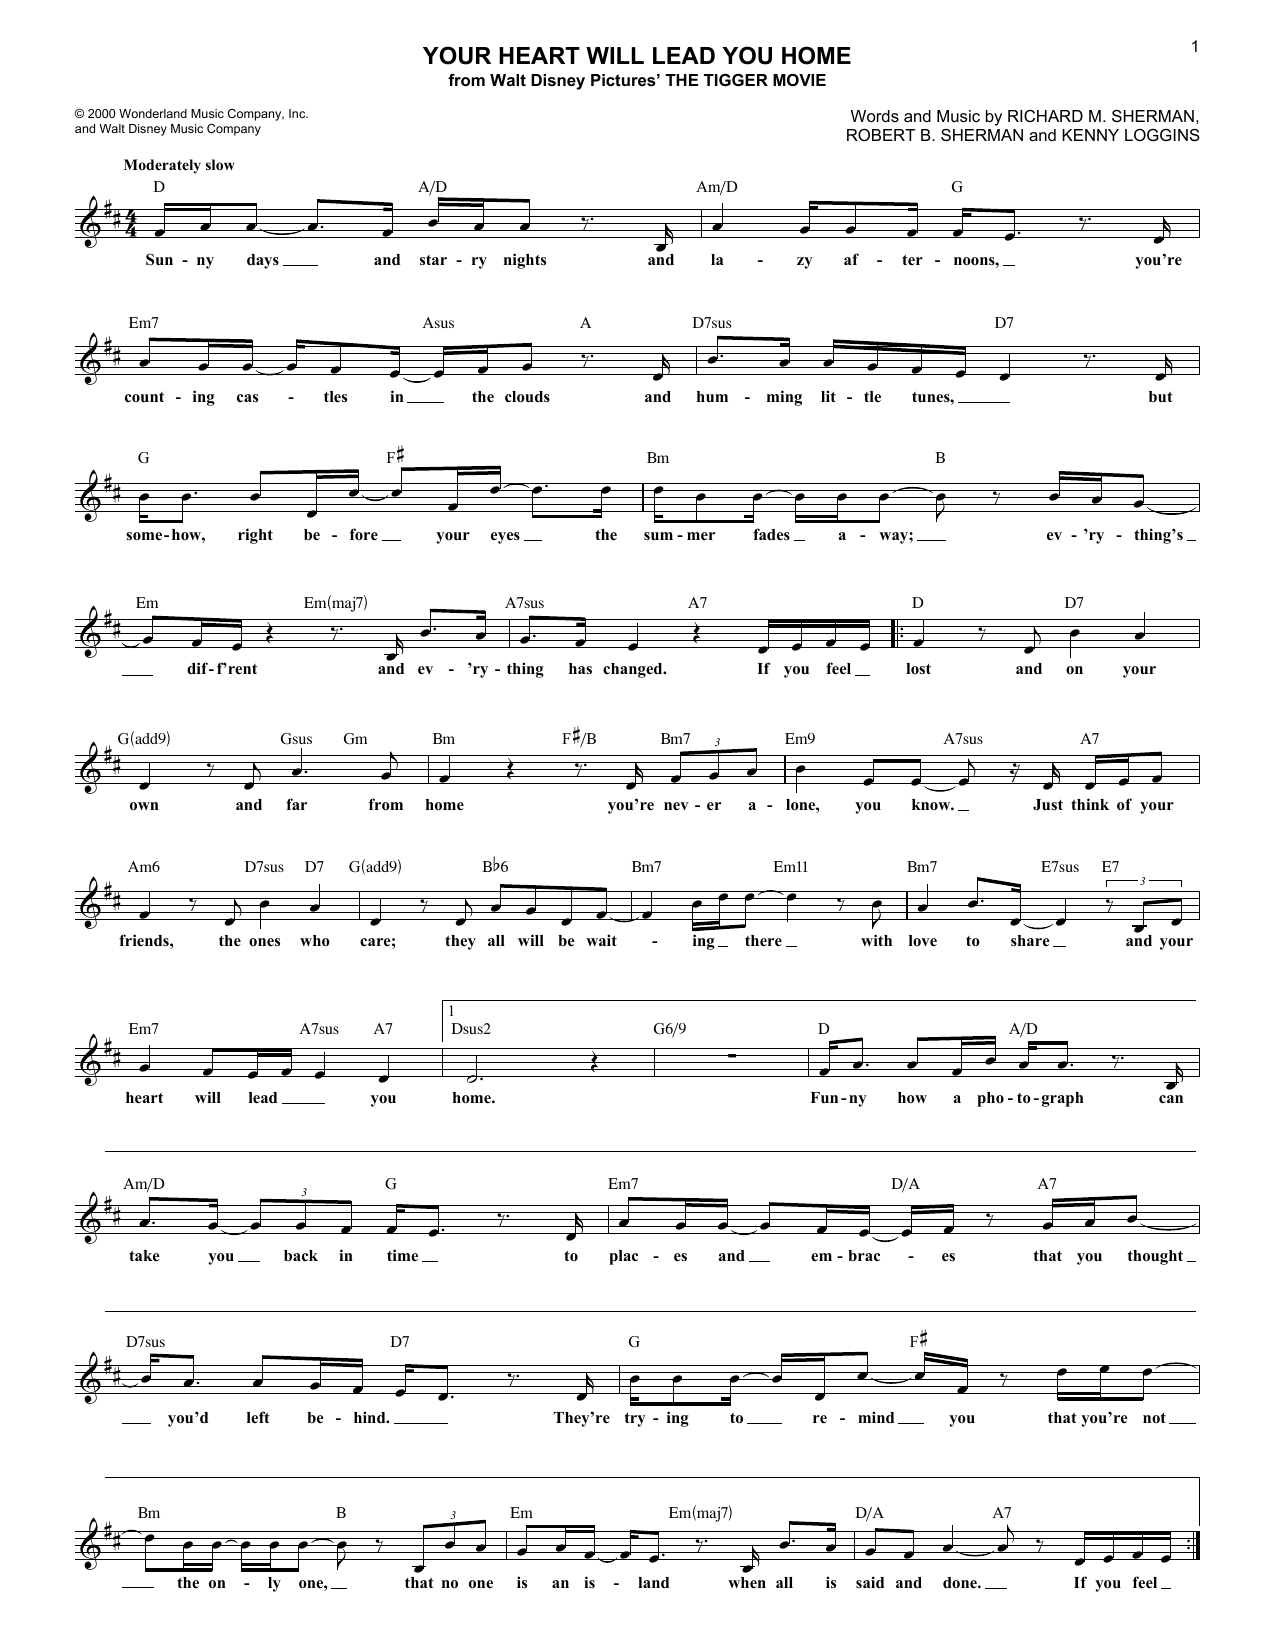 Richard M. Sherman Your Heart Will Lead You Home sheet music notes and chords. Download Printable PDF.